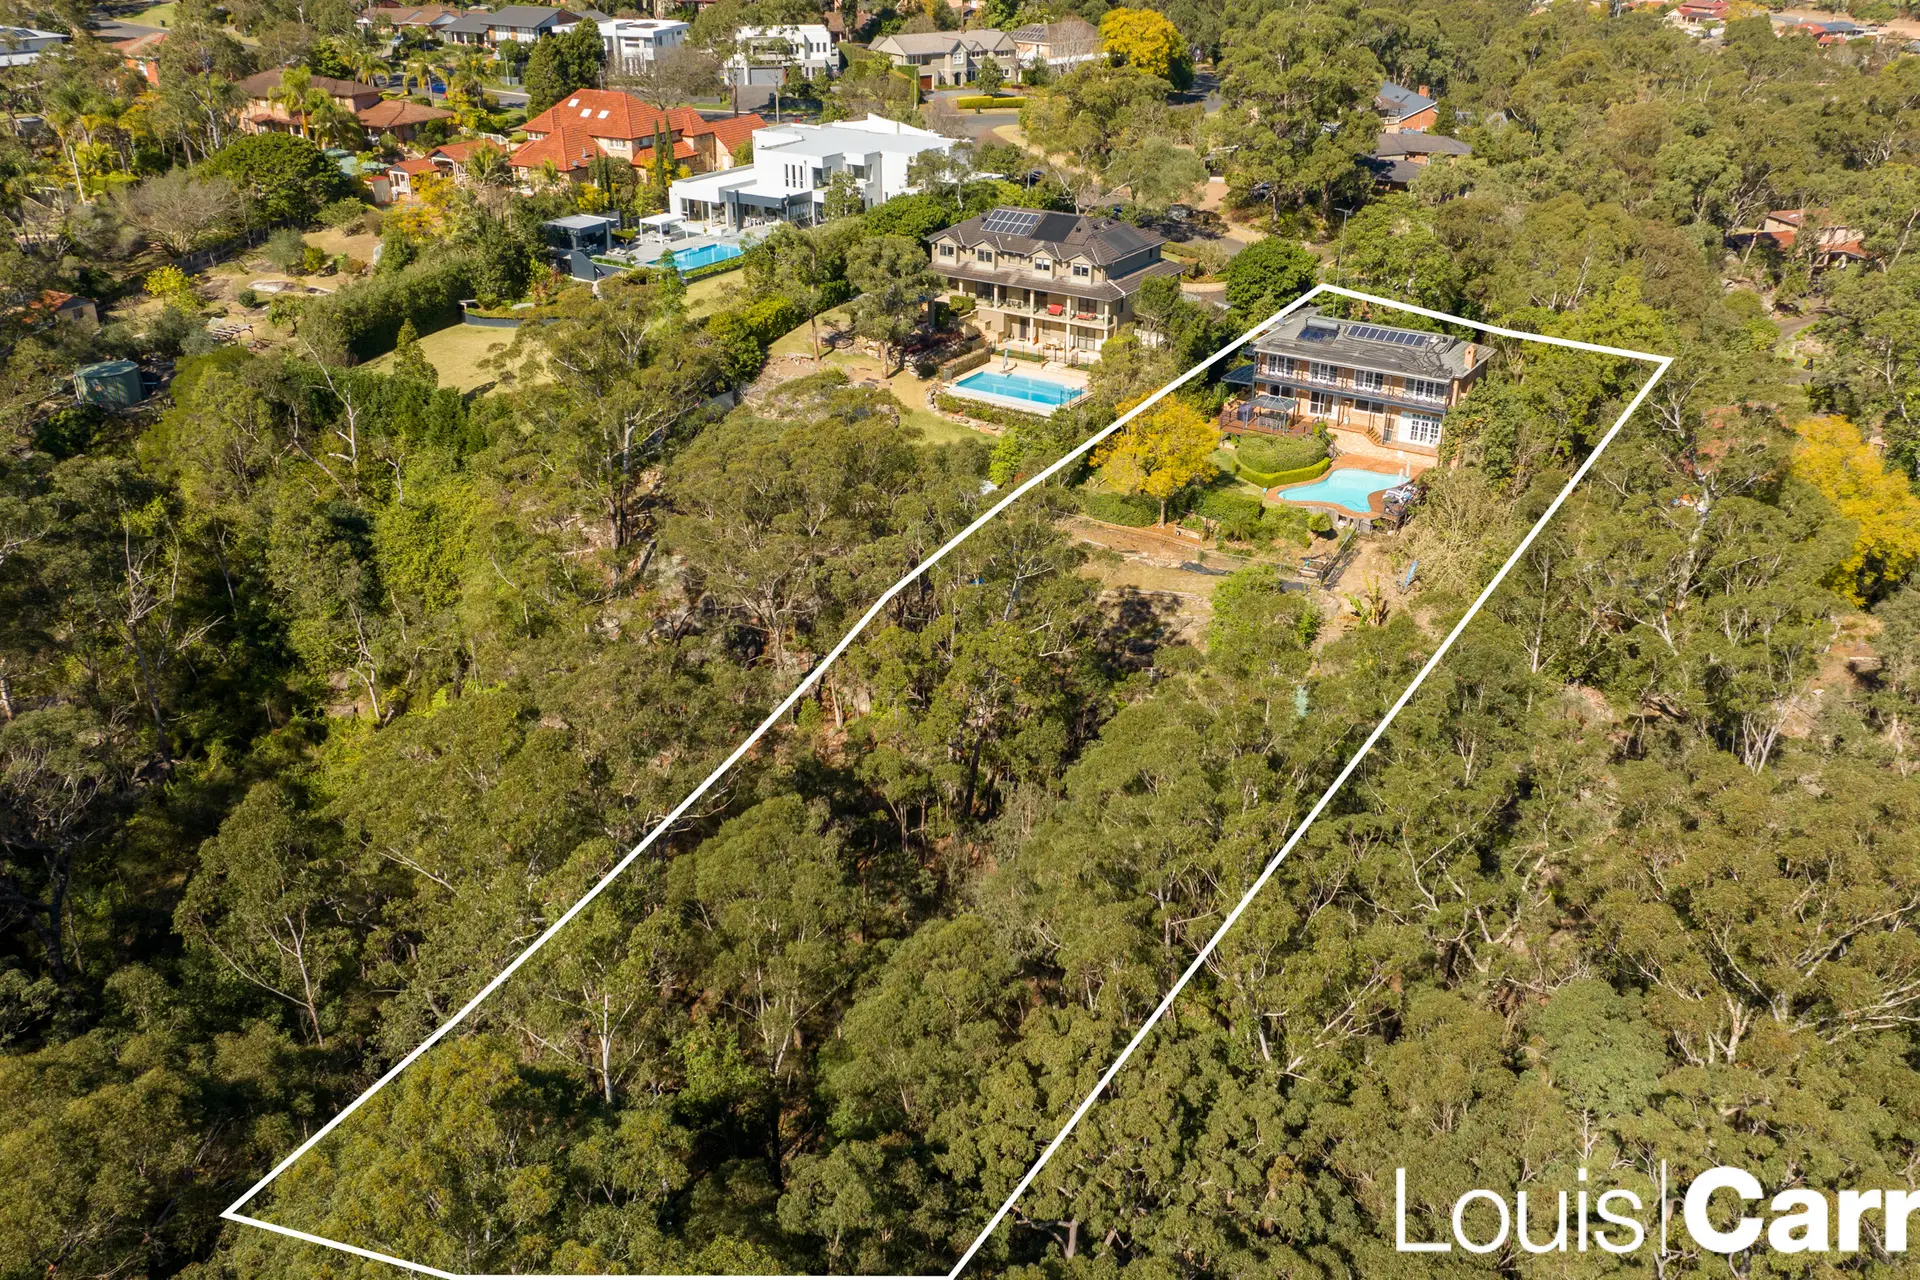 Photo #6: 5 Delavor Place, Glenhaven - For Sale by Louis Carr Real Estate